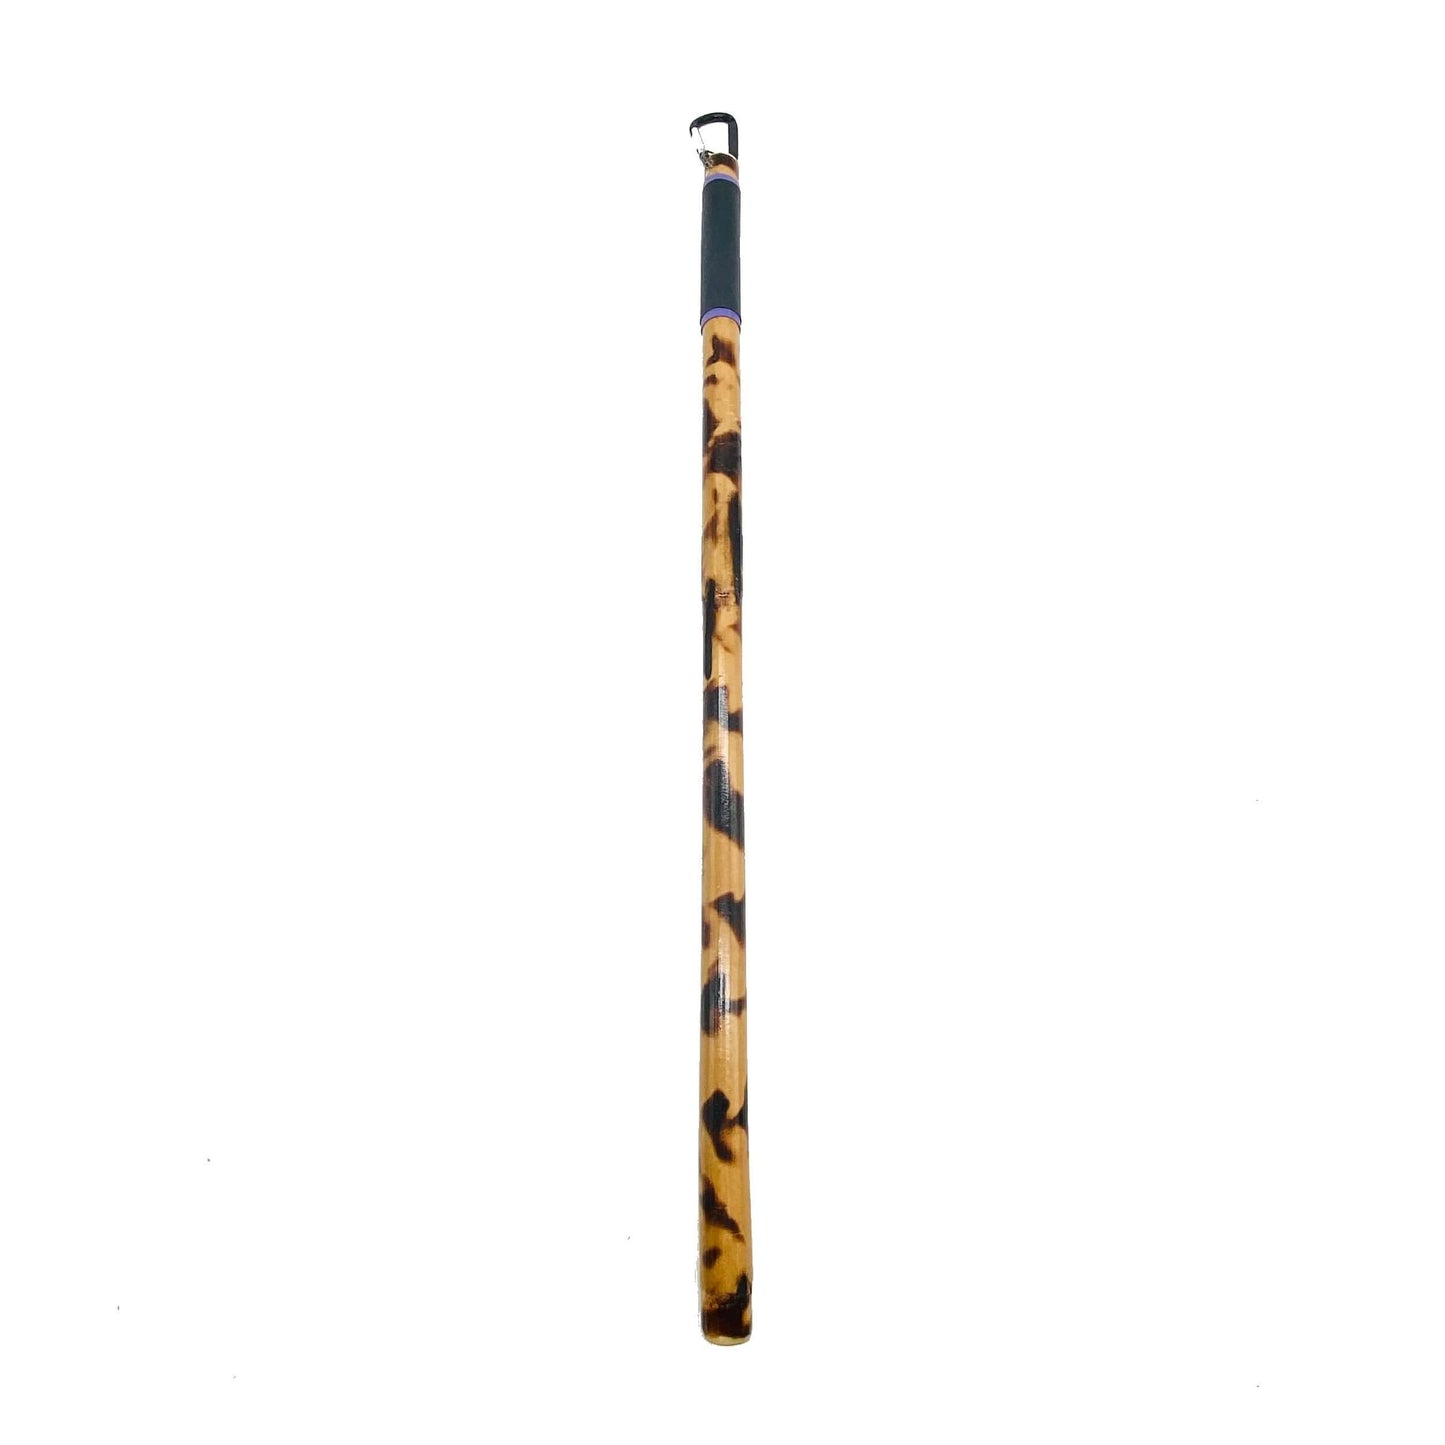 Master Control's Woodshop & Toys's Tiger Rattan Cane - 3/4" - This is a Handmade upon order product. The product usually takes 7-10 days to create. This Tiger Rattan Spanking & Disciplinary Punishment BDSM Cane never fails to get an "ouch" of appreciation